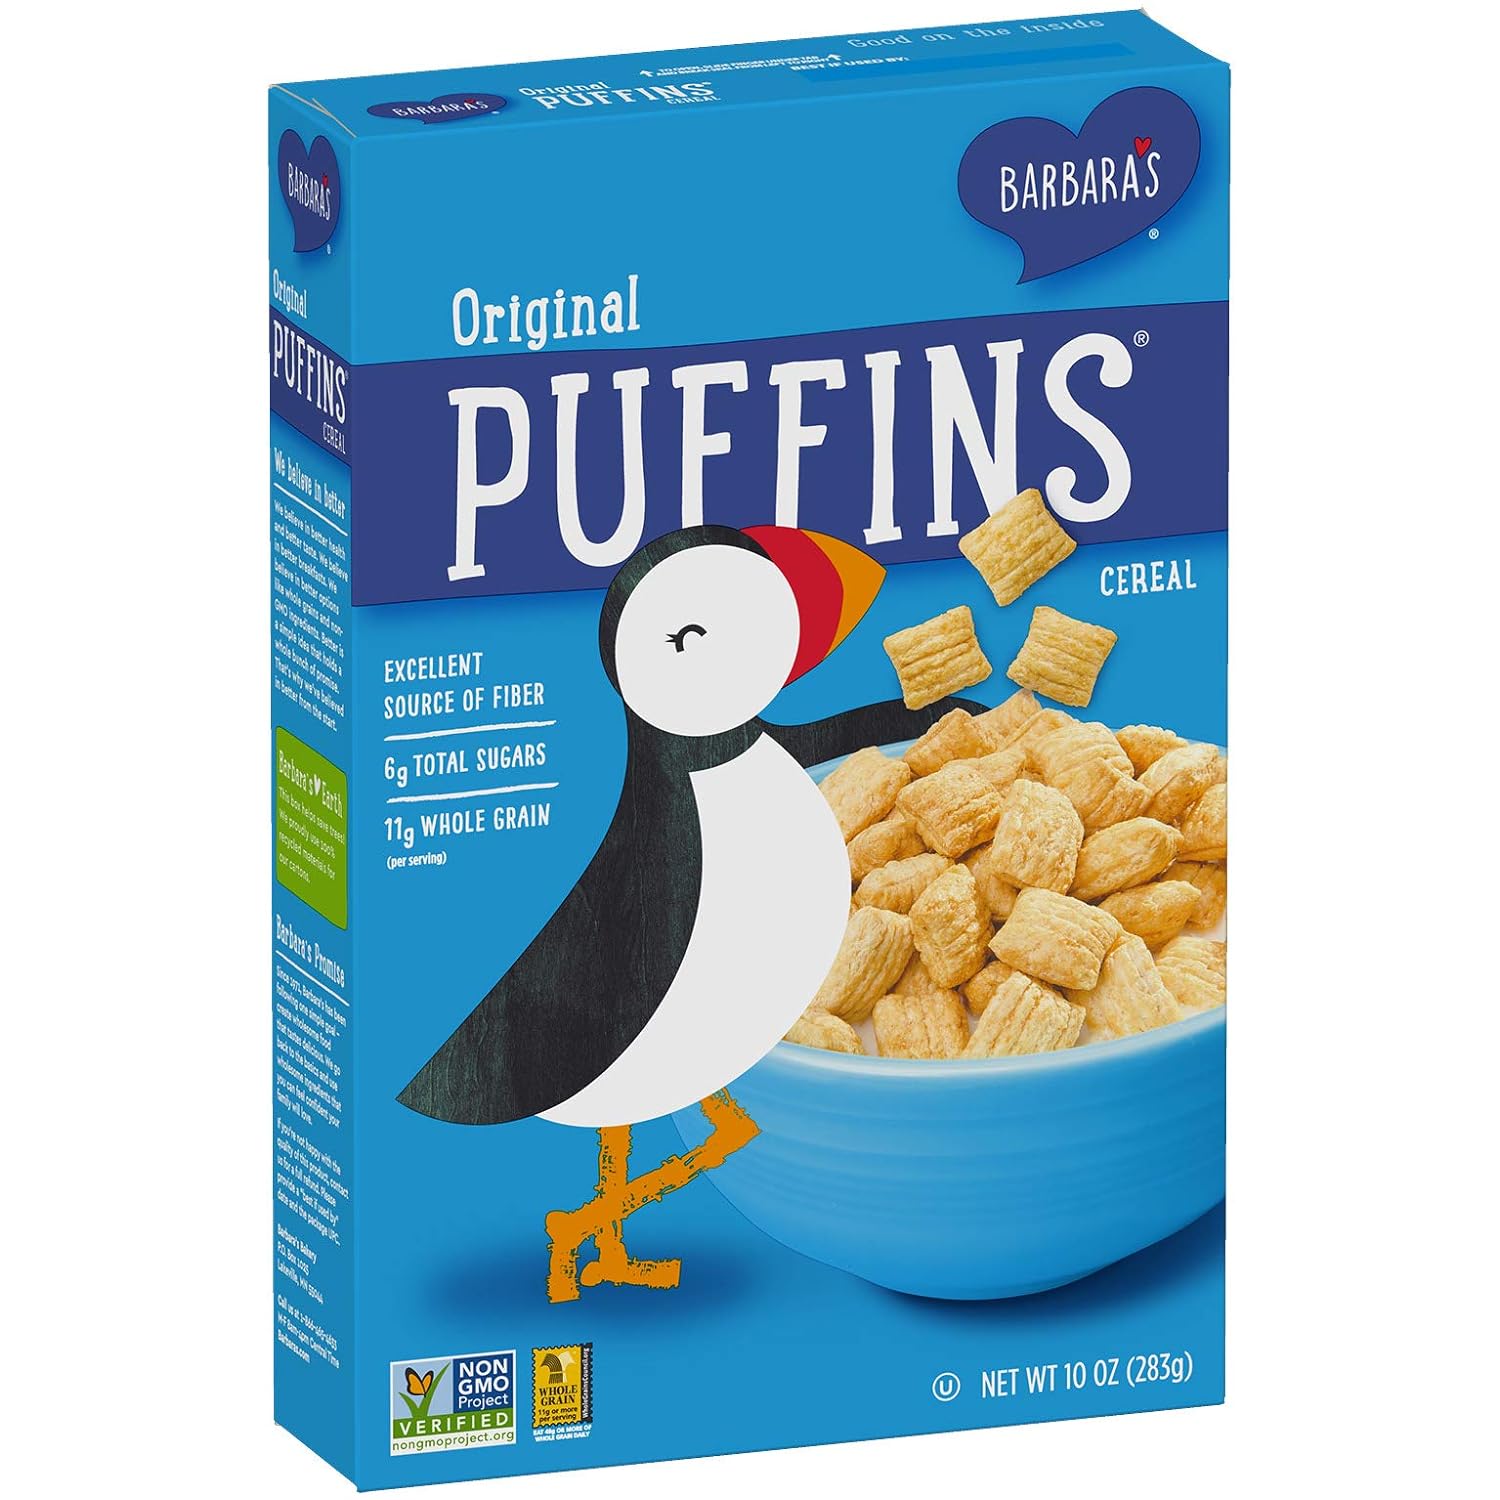 Barbara's Original Puffins Cereal, Puffed Kids Cereal with Corn and Oats, Vegan, Kosher, Non-GMO Project Verified, 10 OZ Box (Pack of 6)